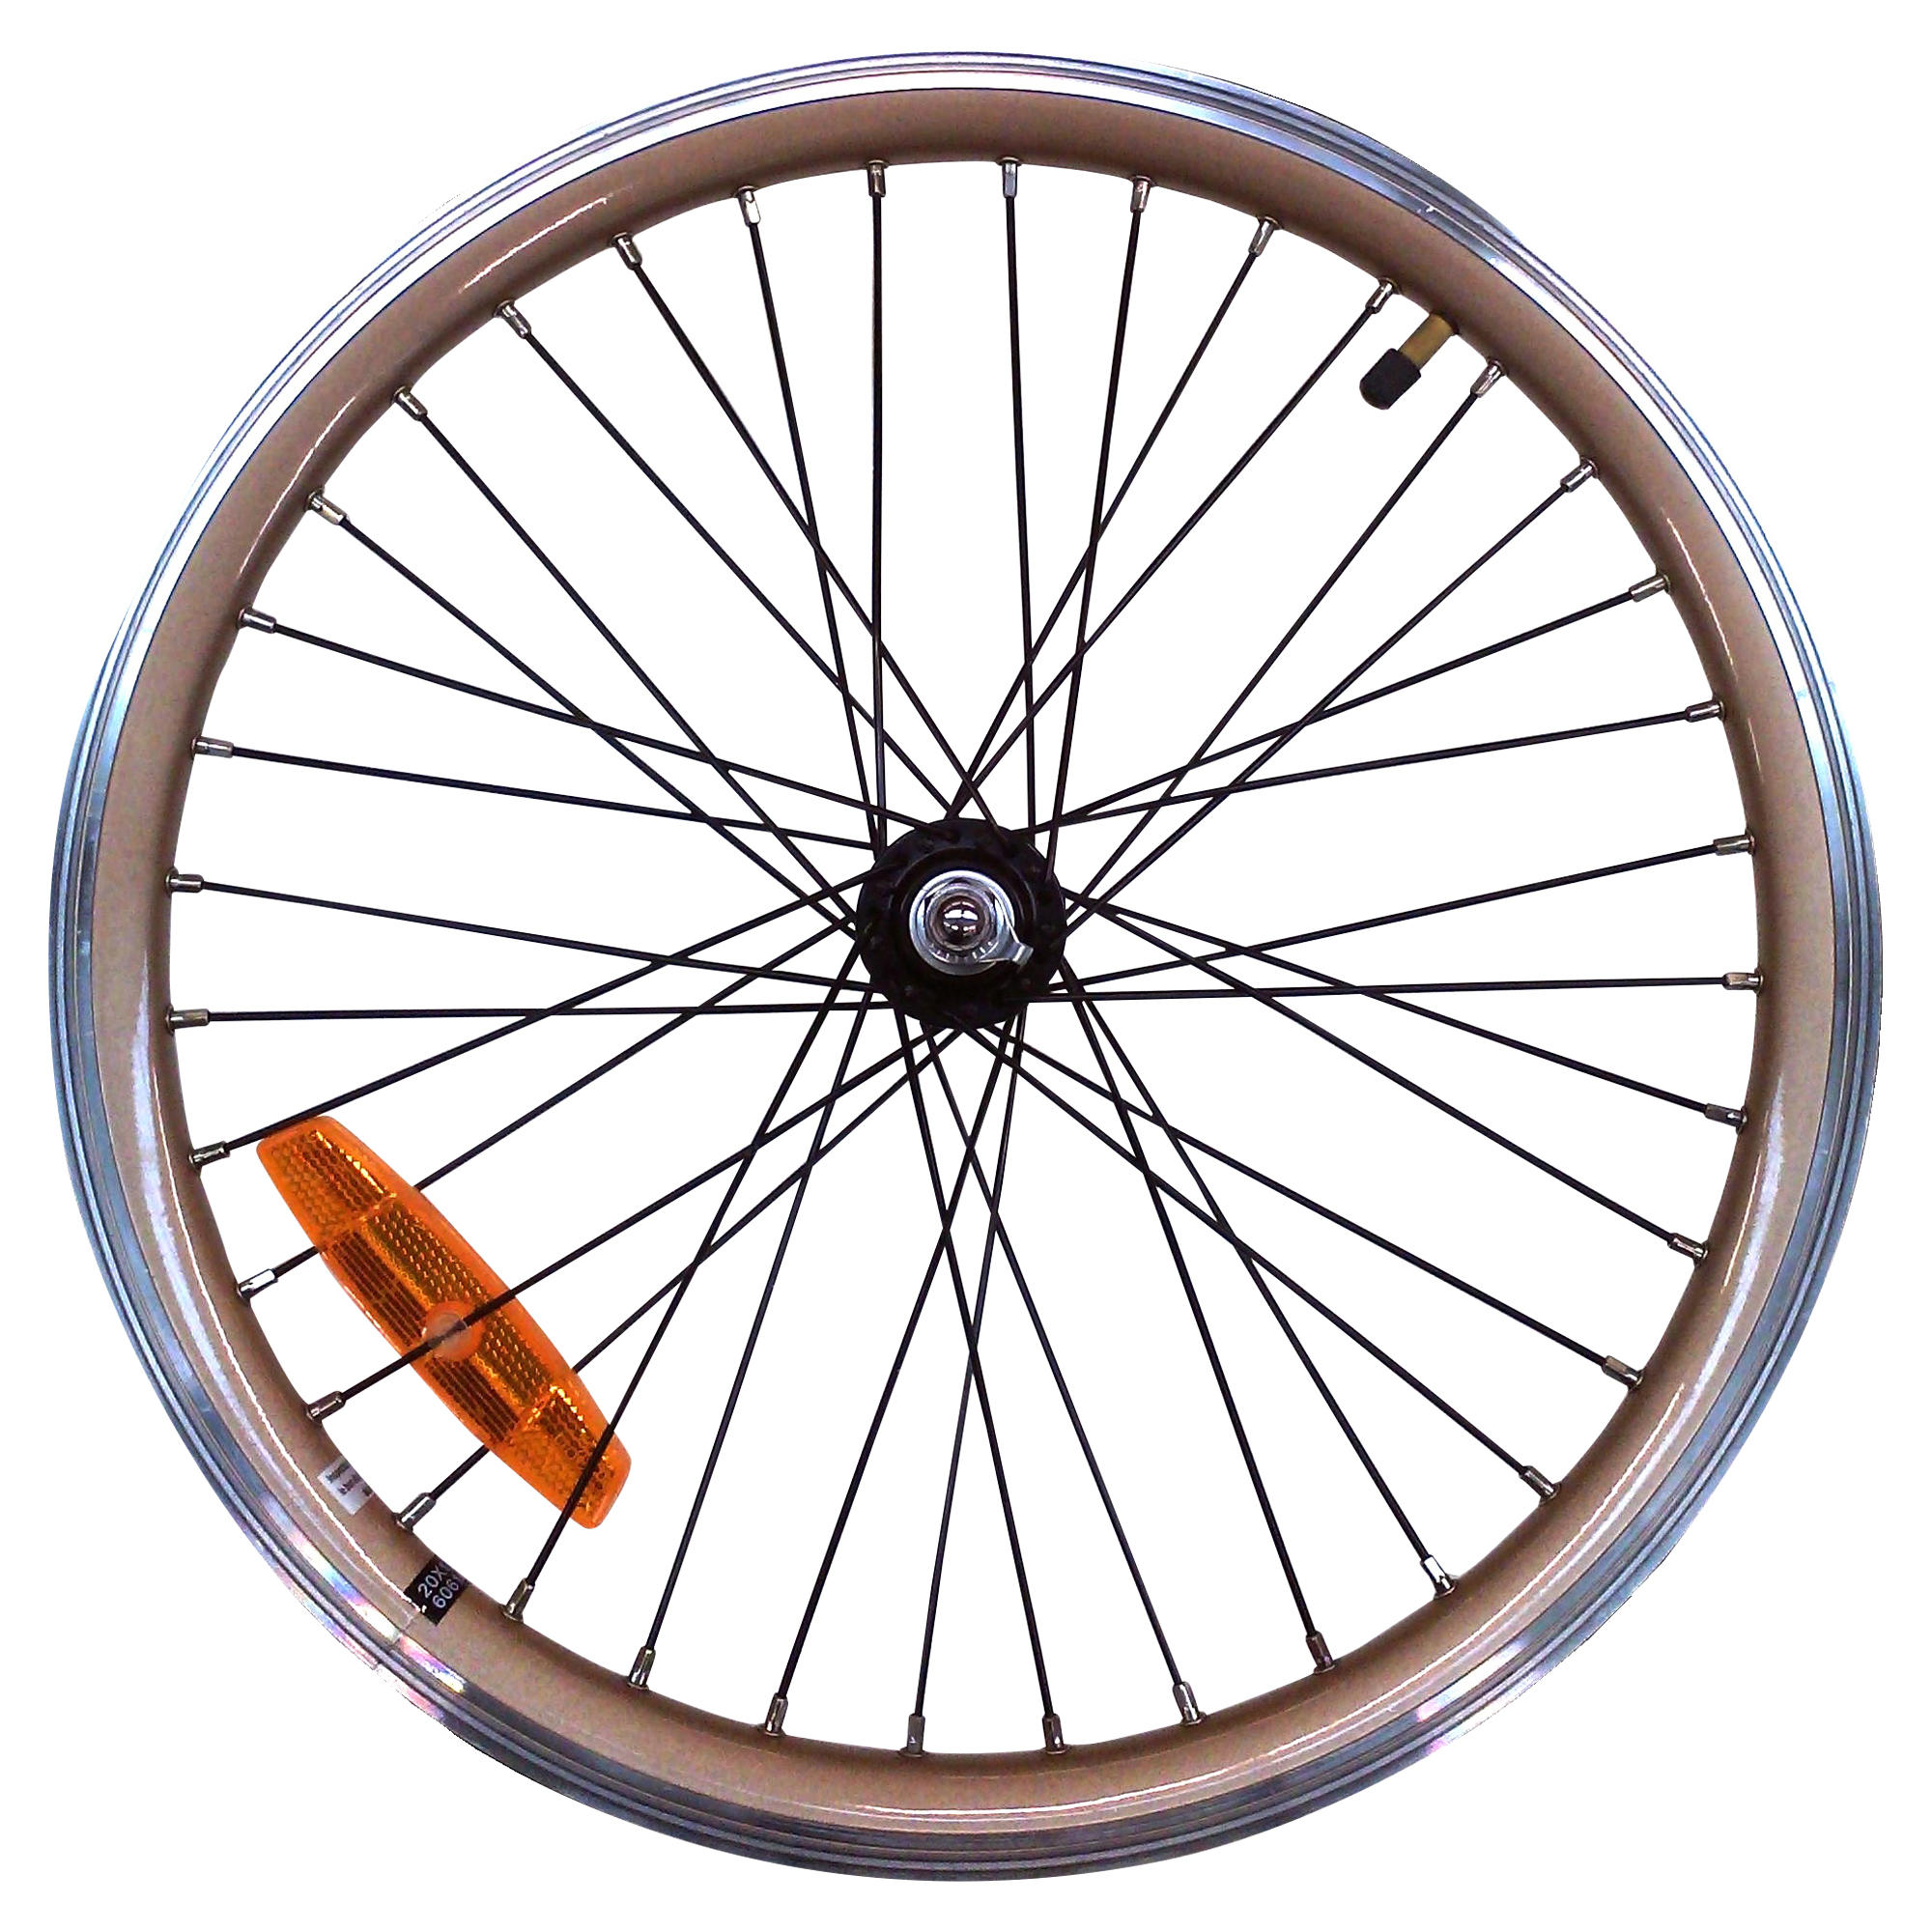 OXYLANE 20" Double-Walled Front Wheel for the Hoptown 500E Folding Bike - Gold